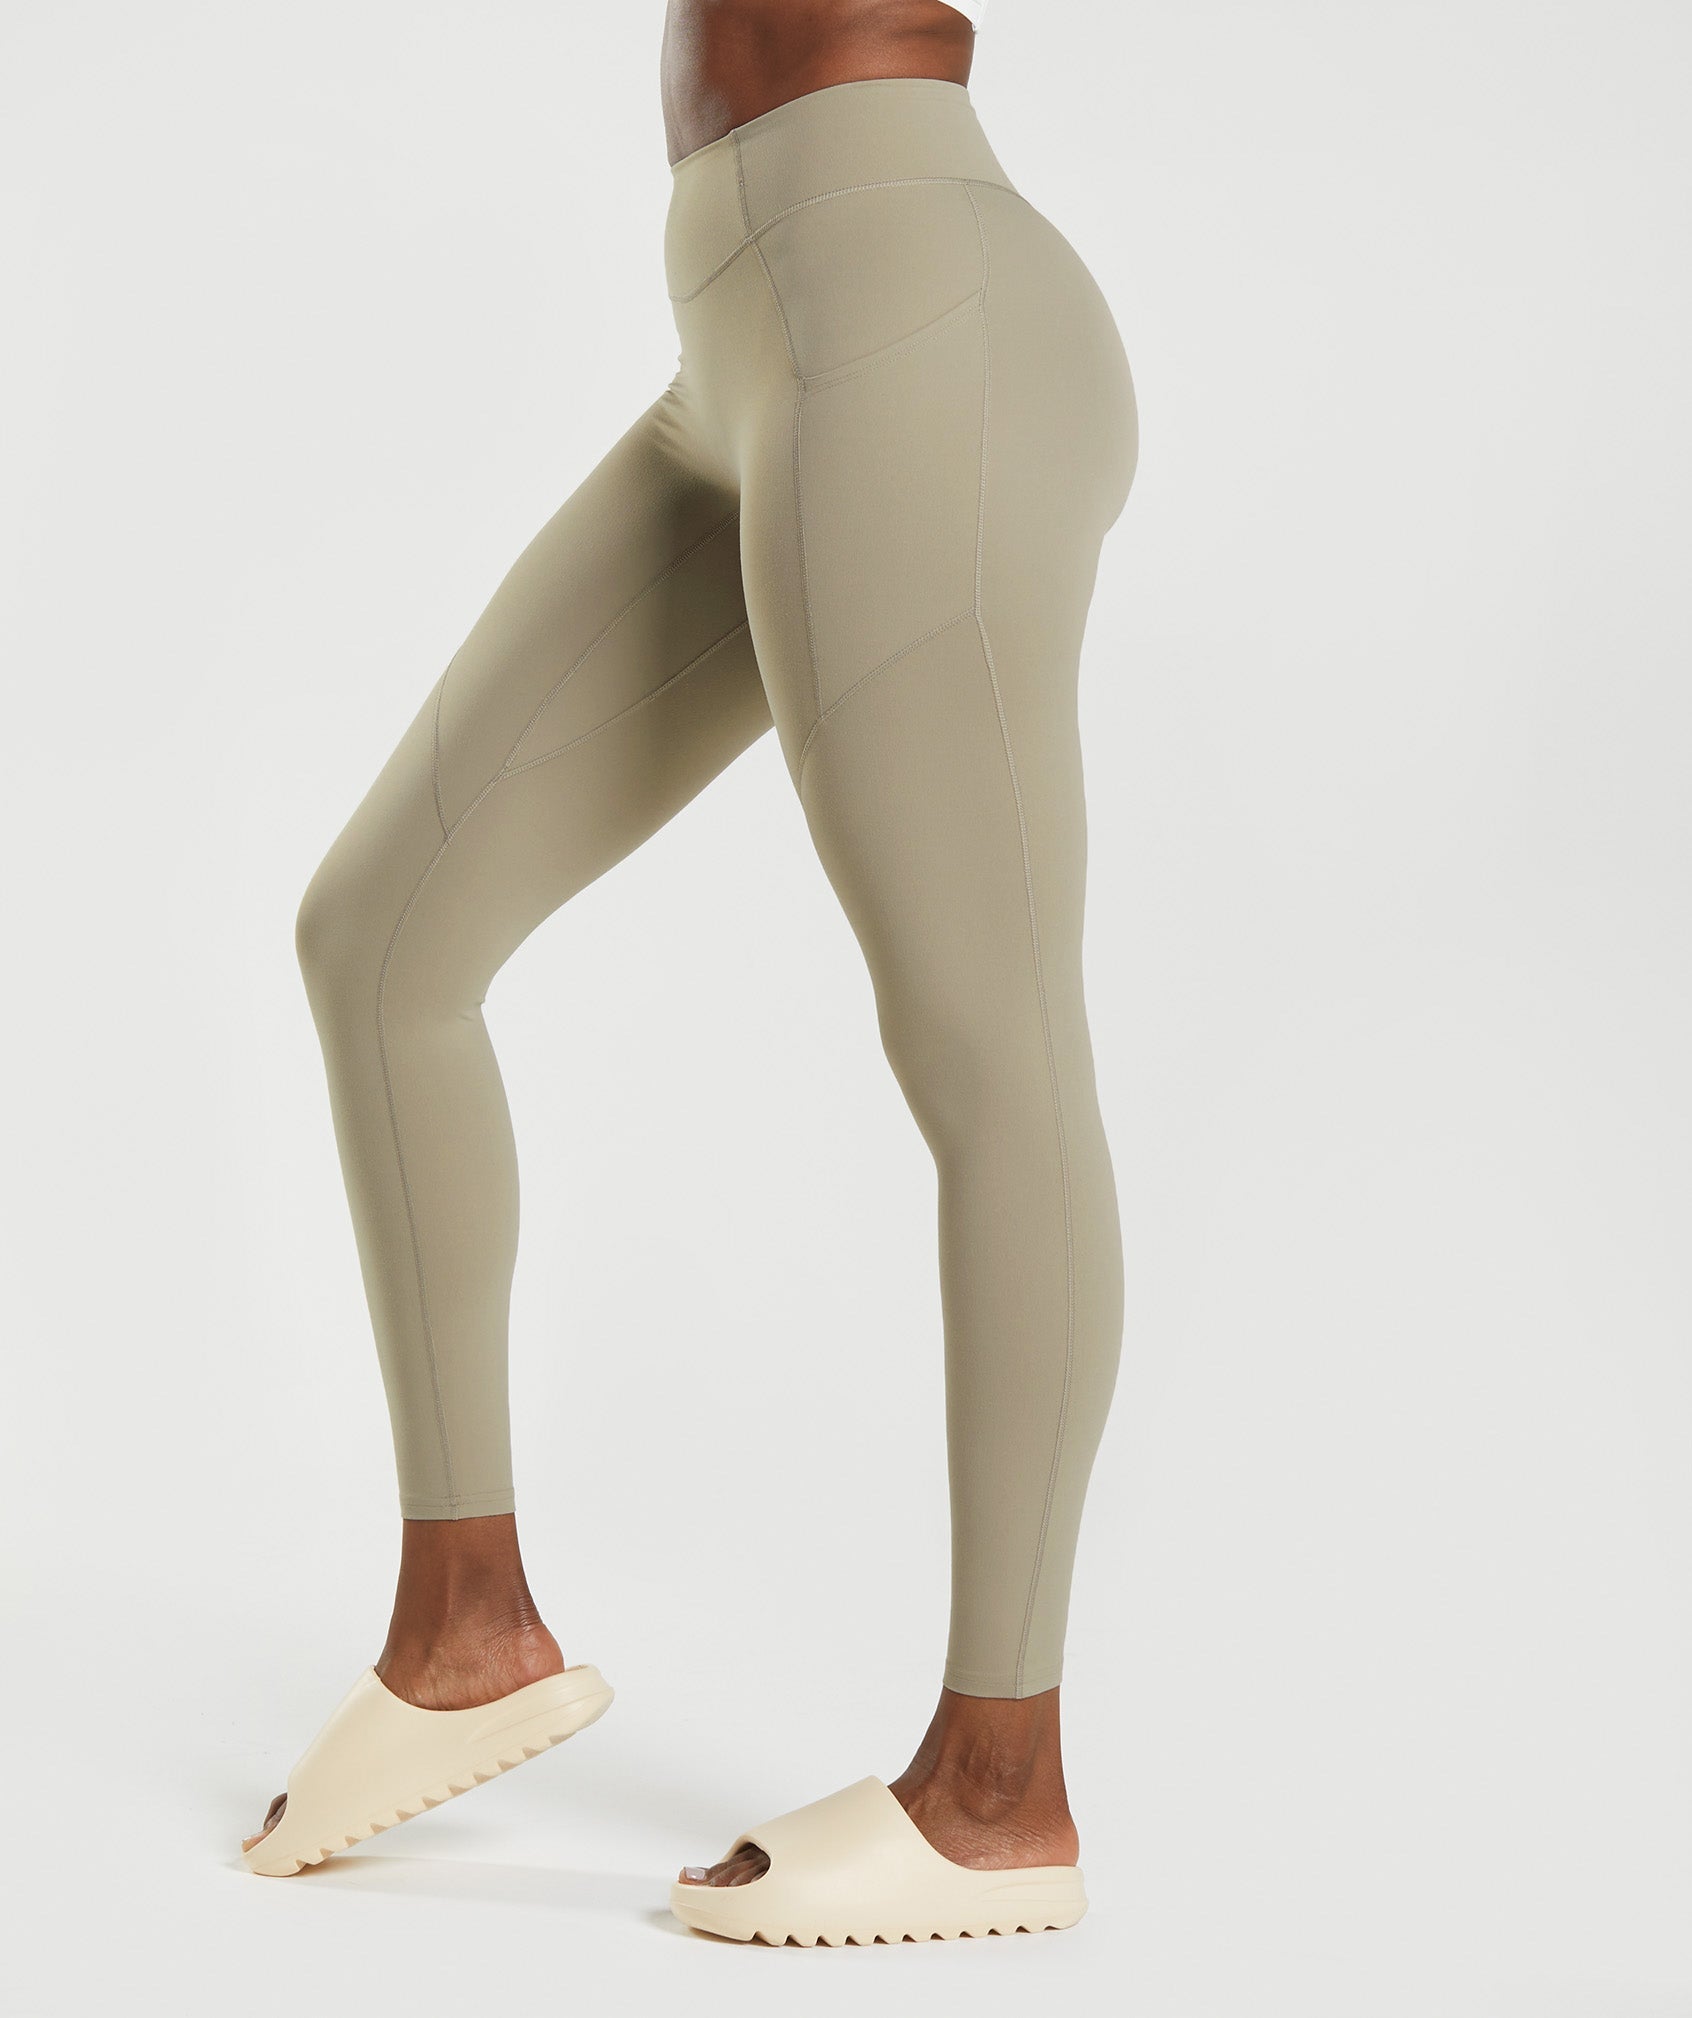 Whitney Everyday Pocket Leggings in Cement Brown - view 7